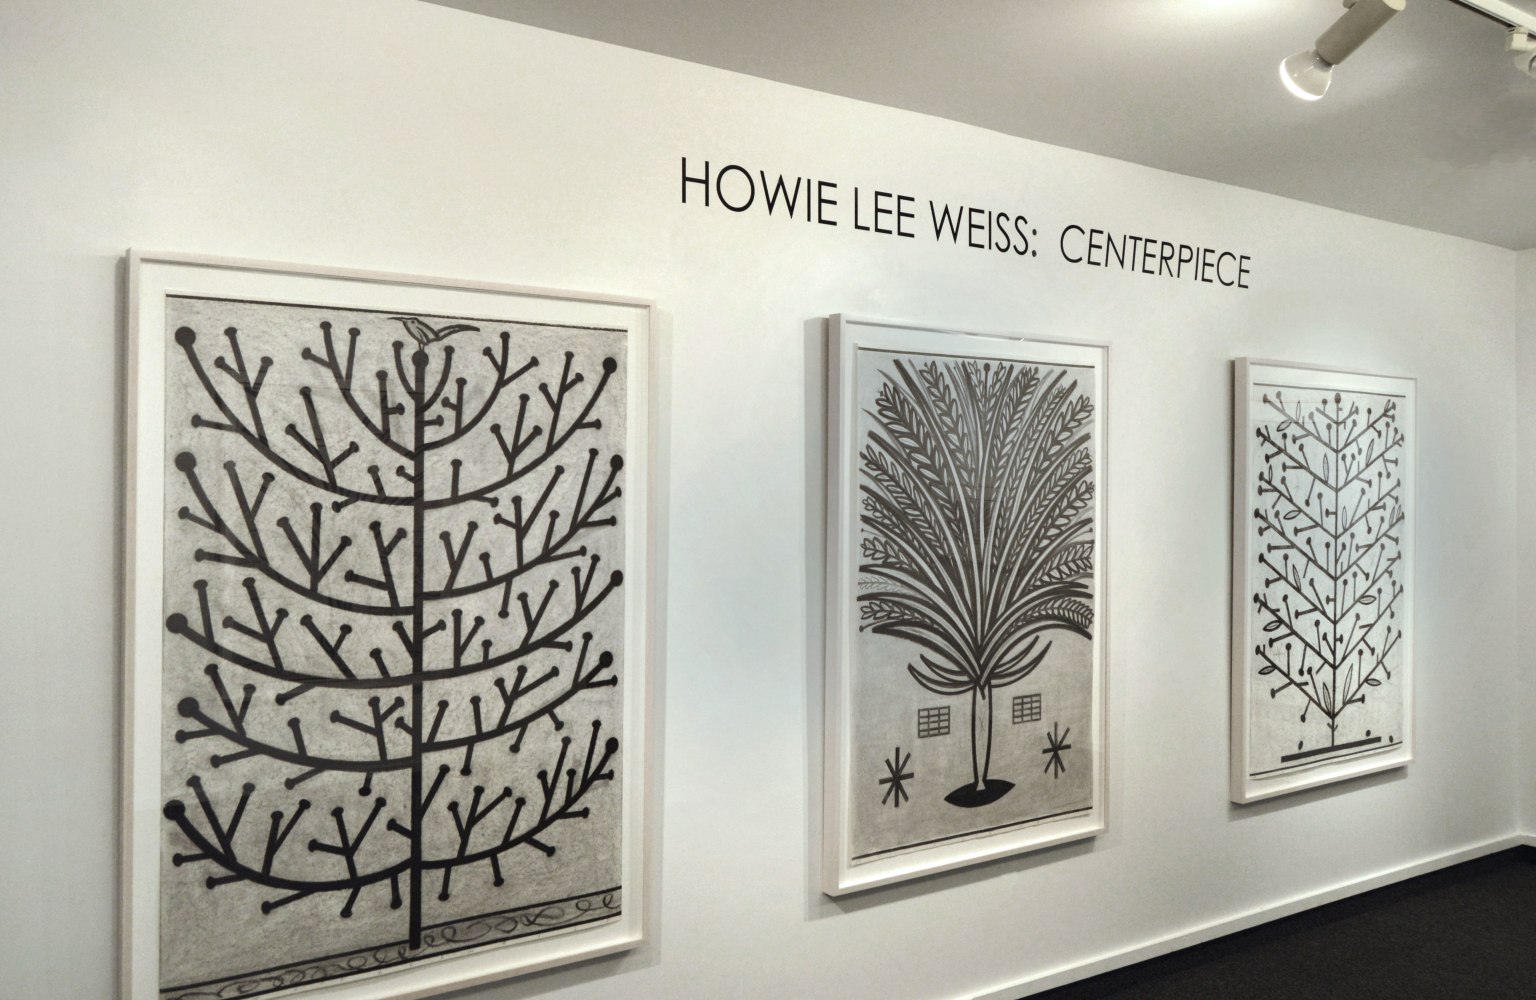 'Howie Lee Weiss: Centerpiece' at Gross McCleaf Gallery